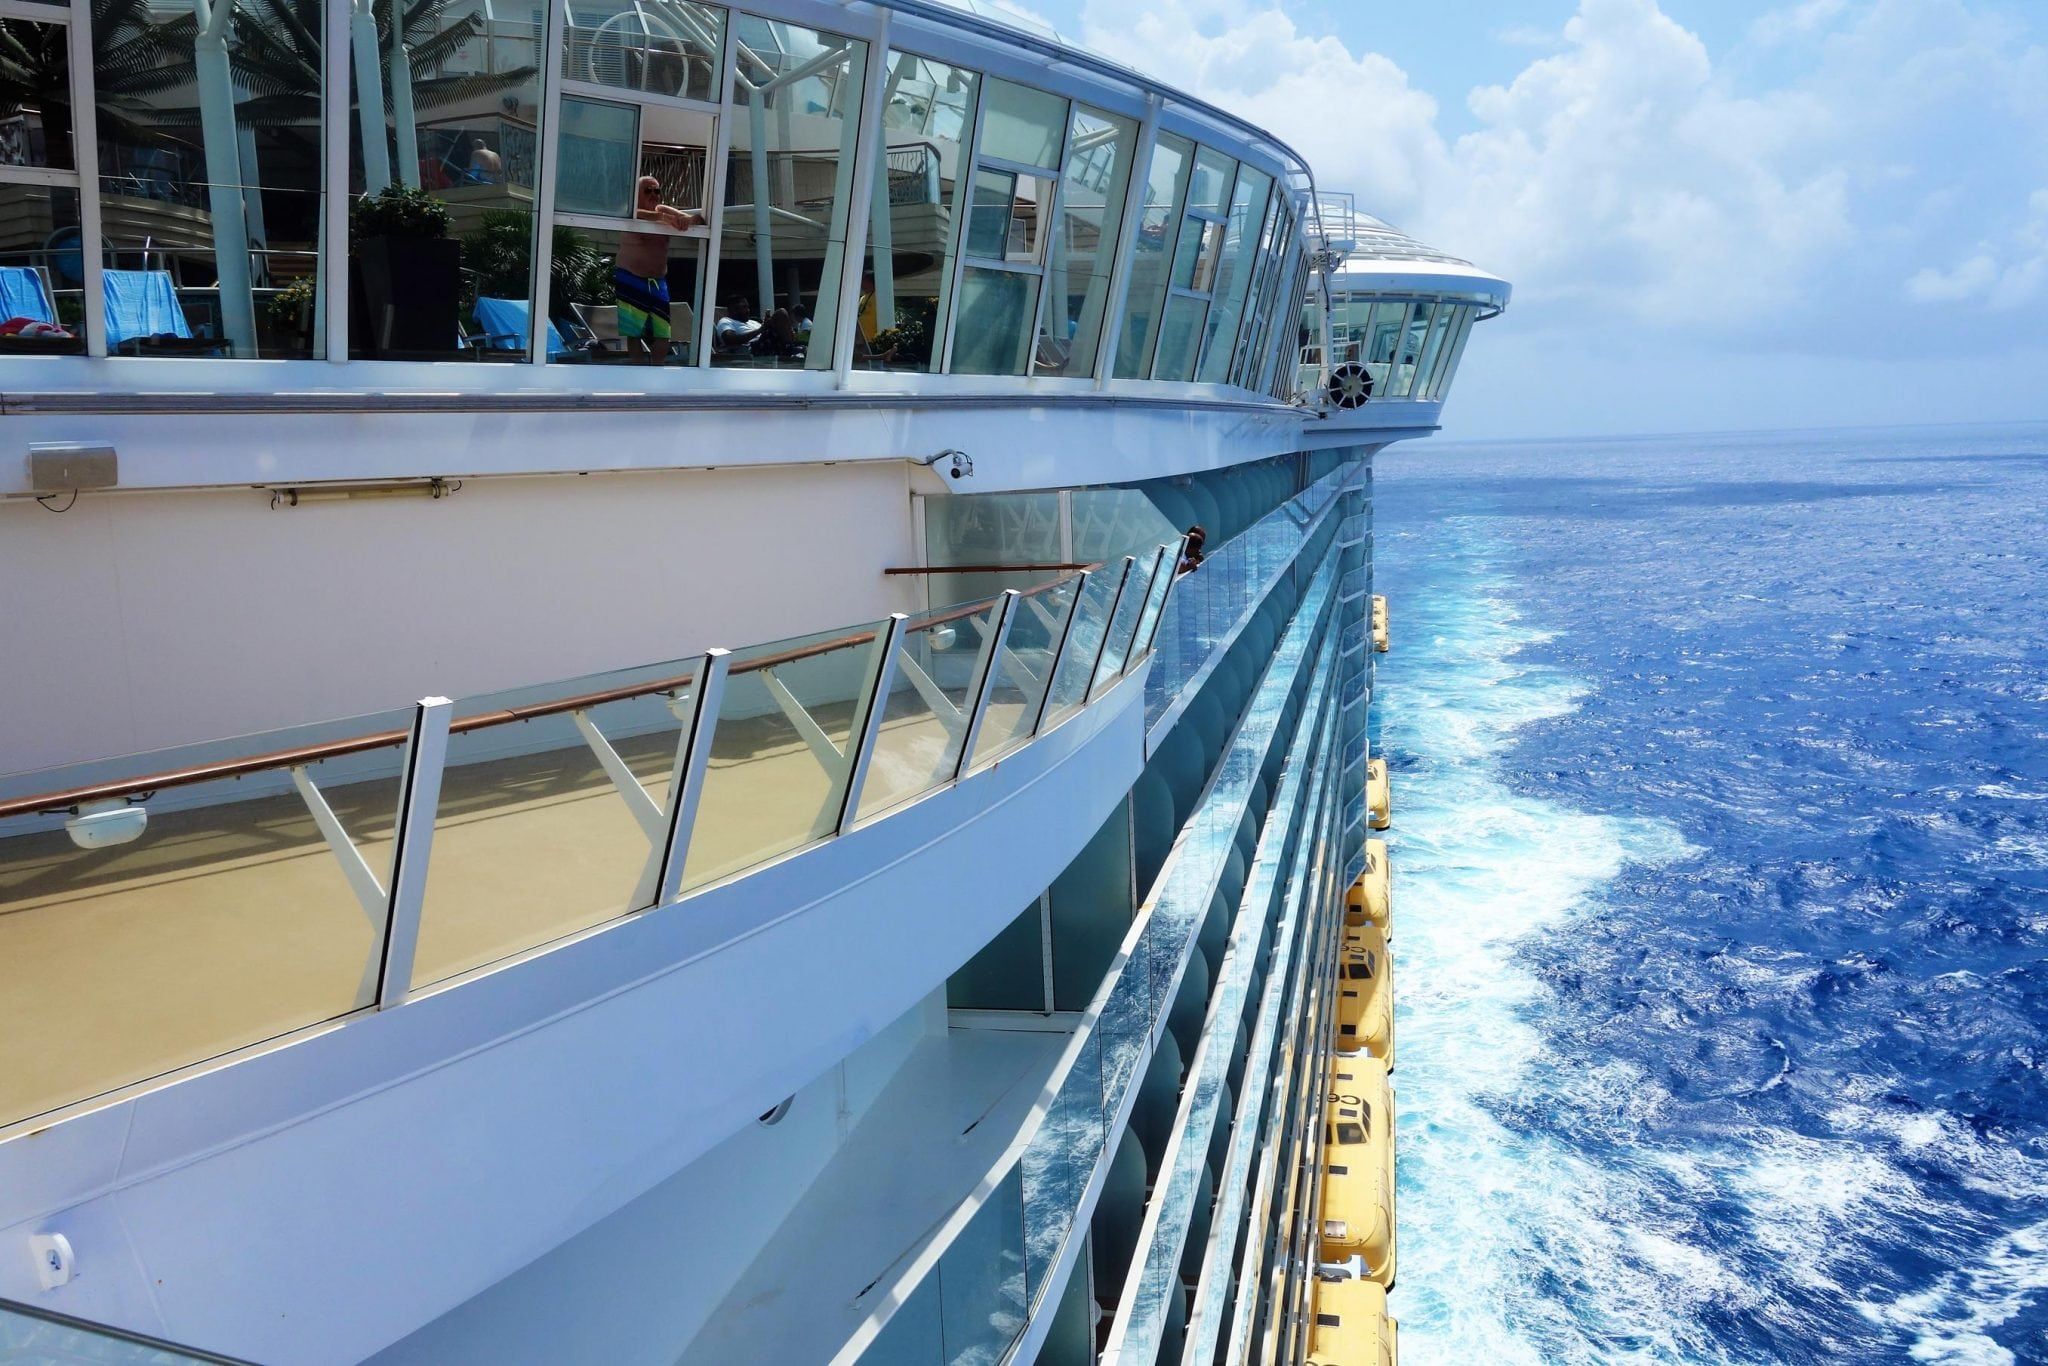 The Perfect Sea Day on Oasis of the Seas